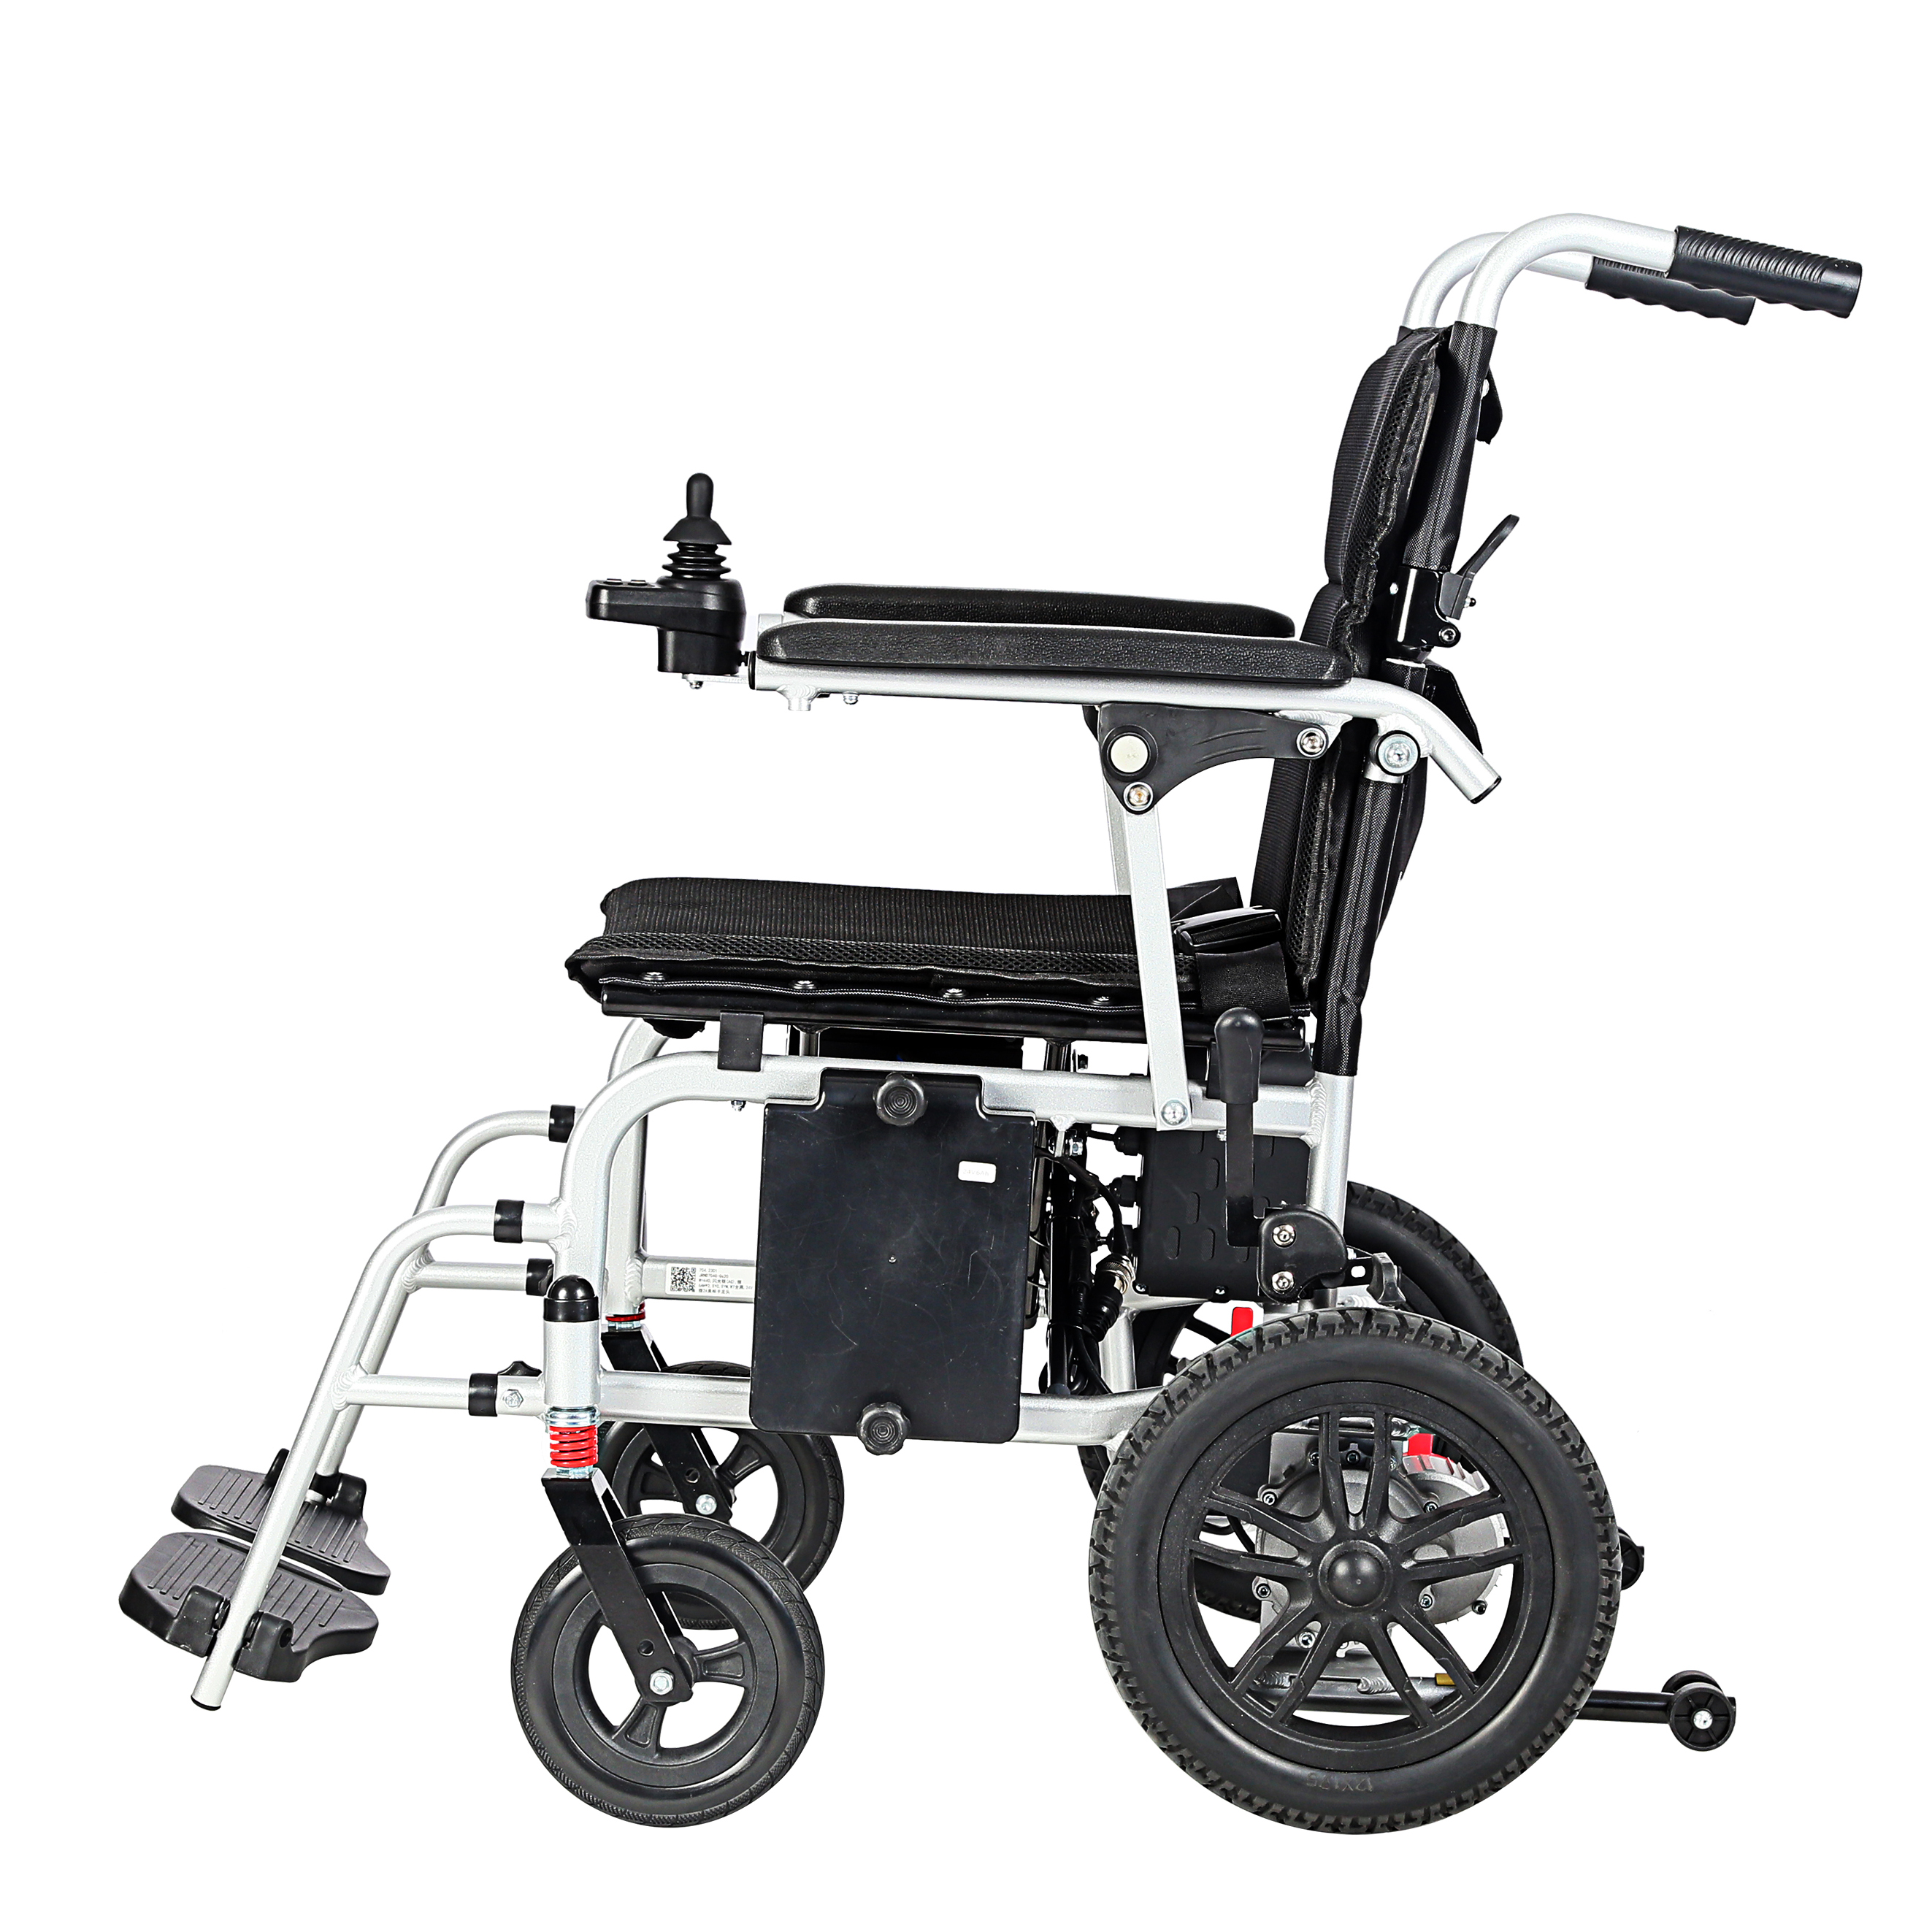 KSM-509 Lightweight Aluminum Foldable Power Wheel chair Cheap Price Disabled Portable Folding Electric Wheelchair for Disabled